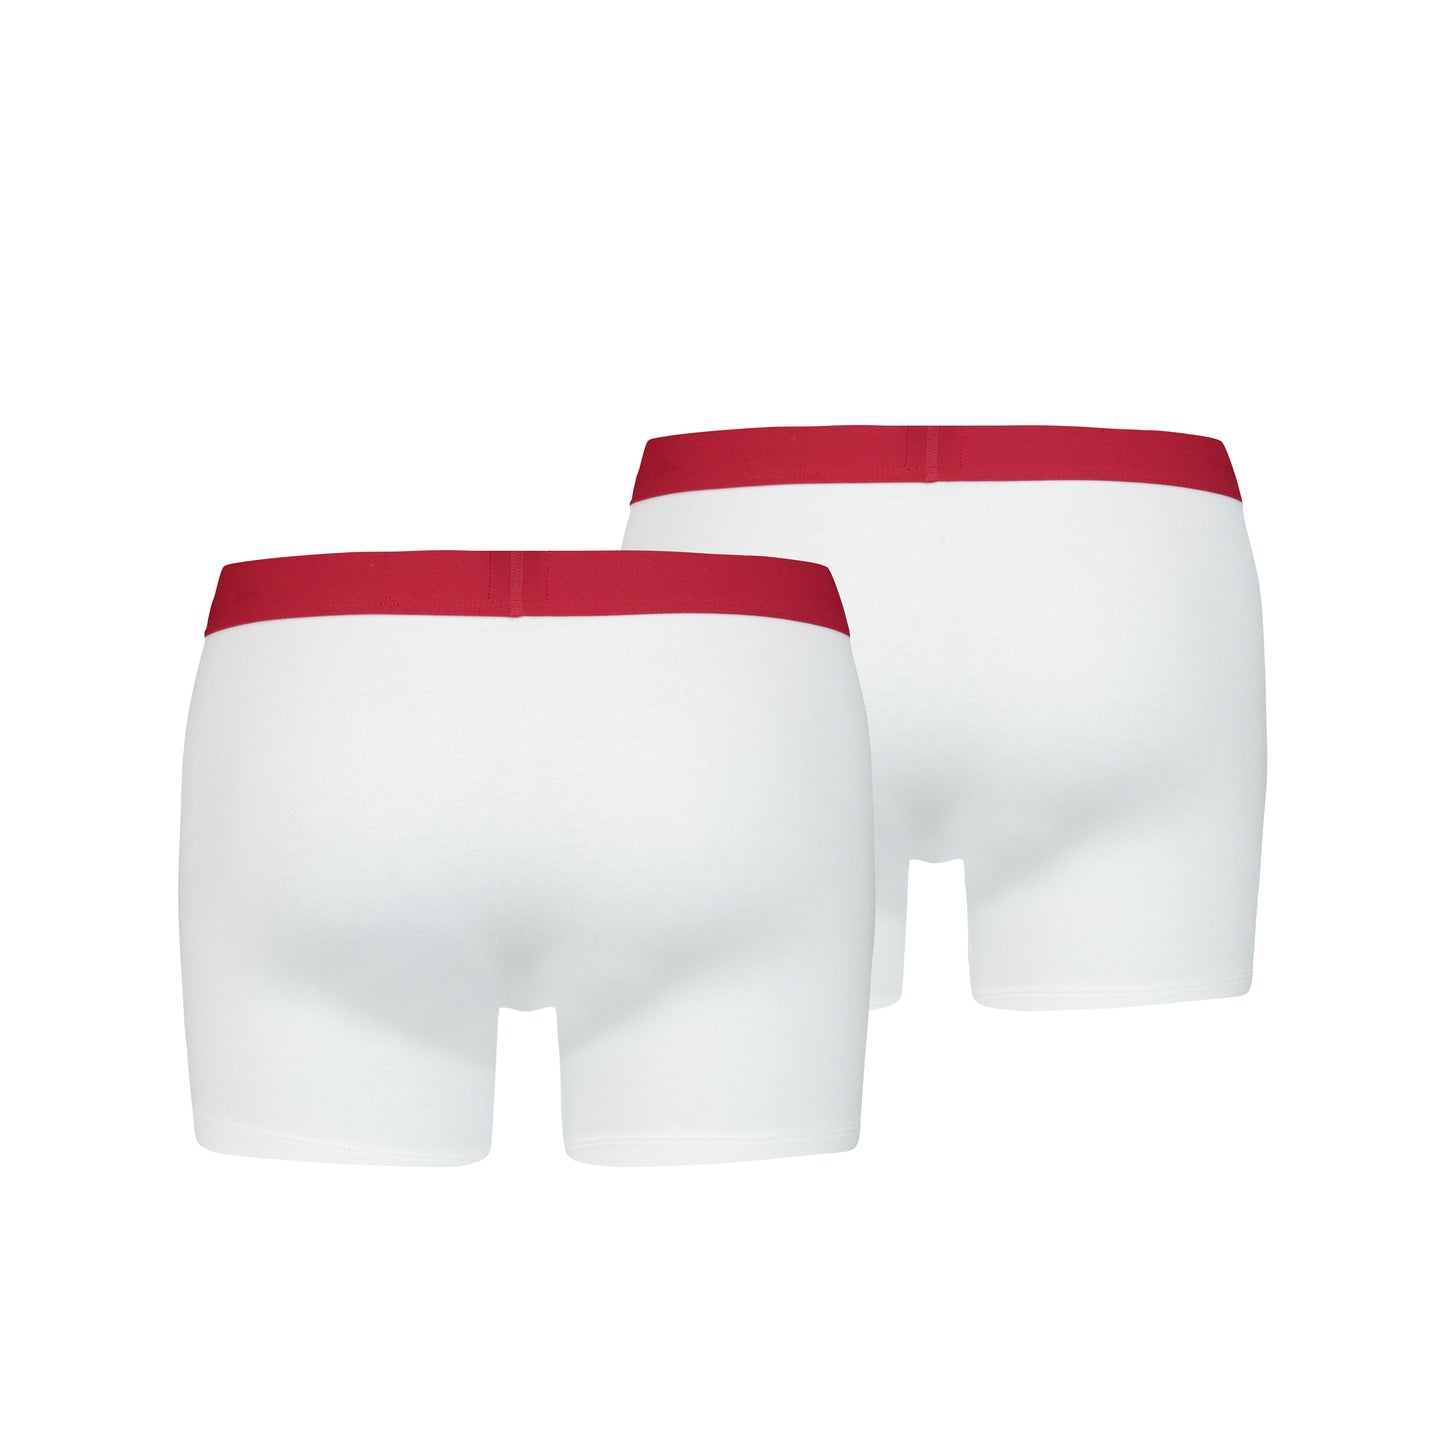 Levi's 905001001 317 White Boxer Brief Two Pack